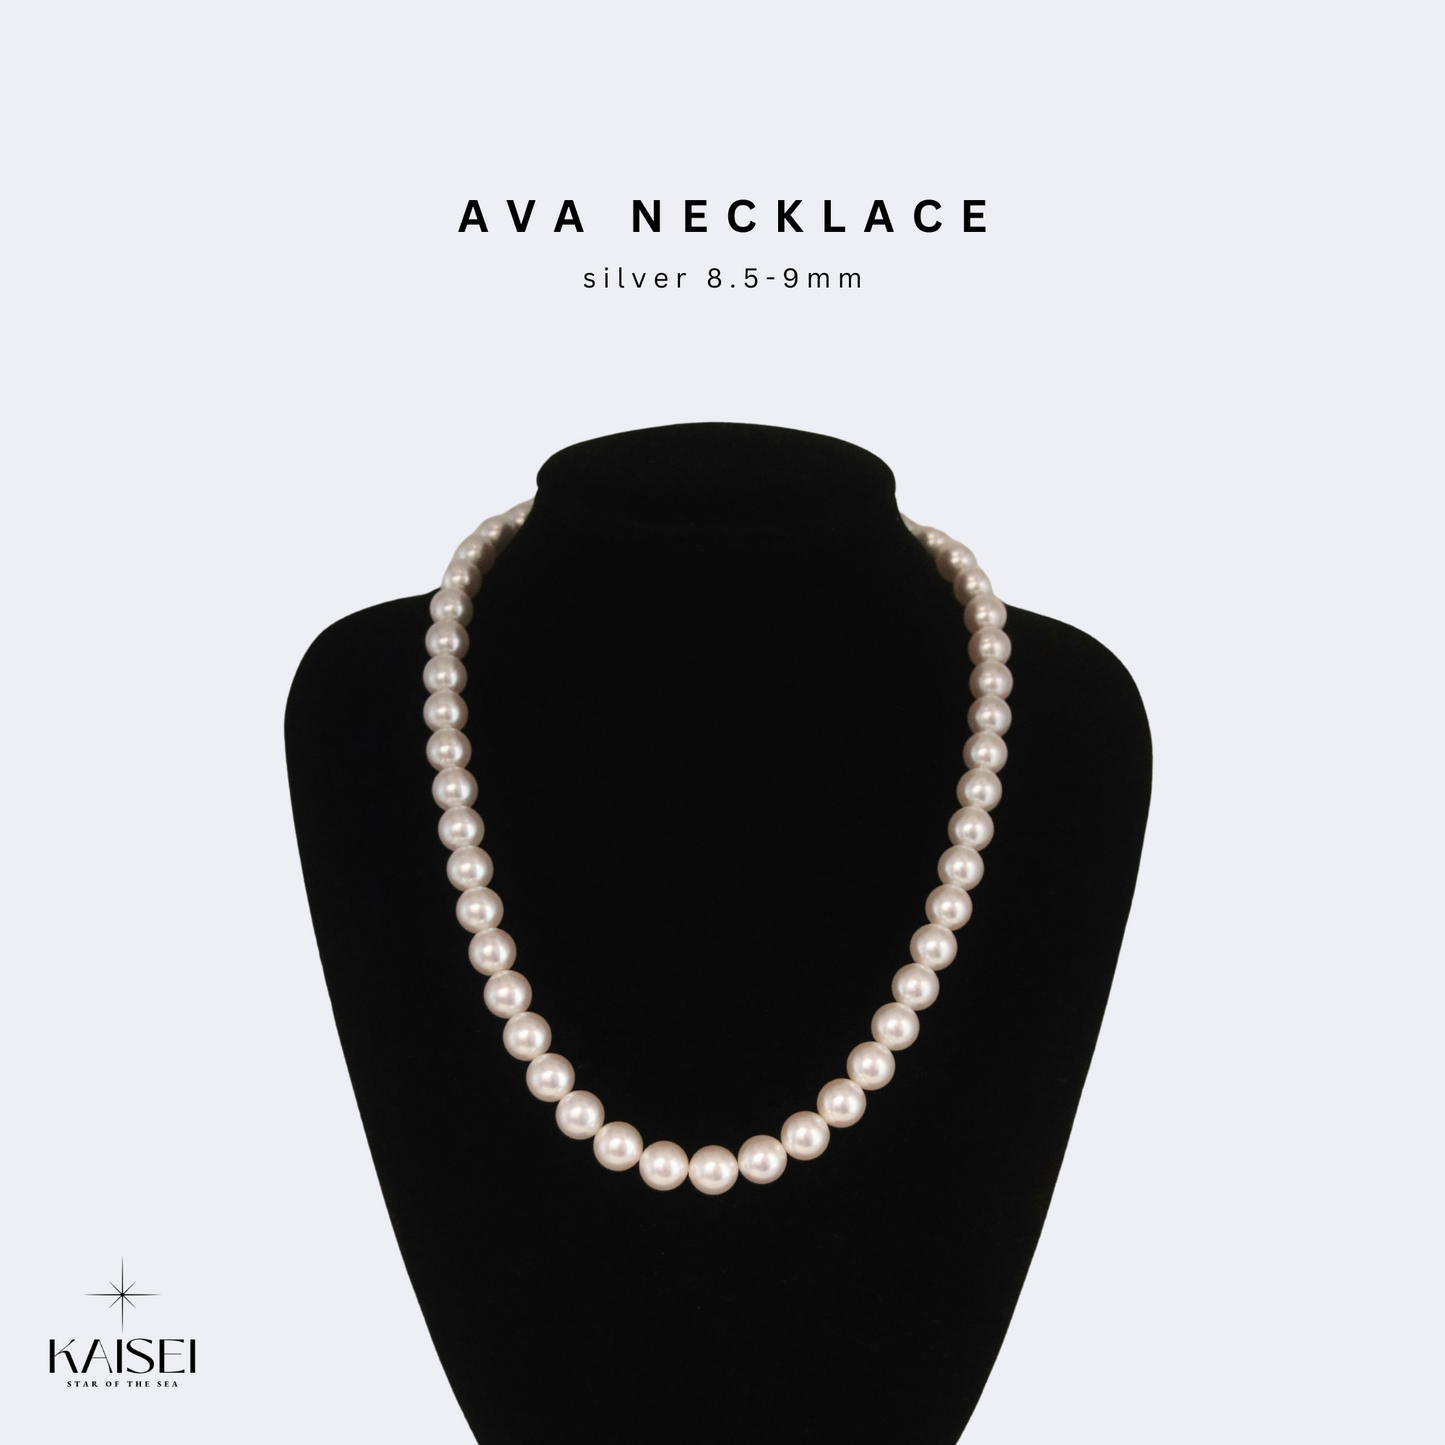 Kaisei Pearl - Ava Necklace Akoya Japanese Pearl 8.5-9mm Necklace Jewelry